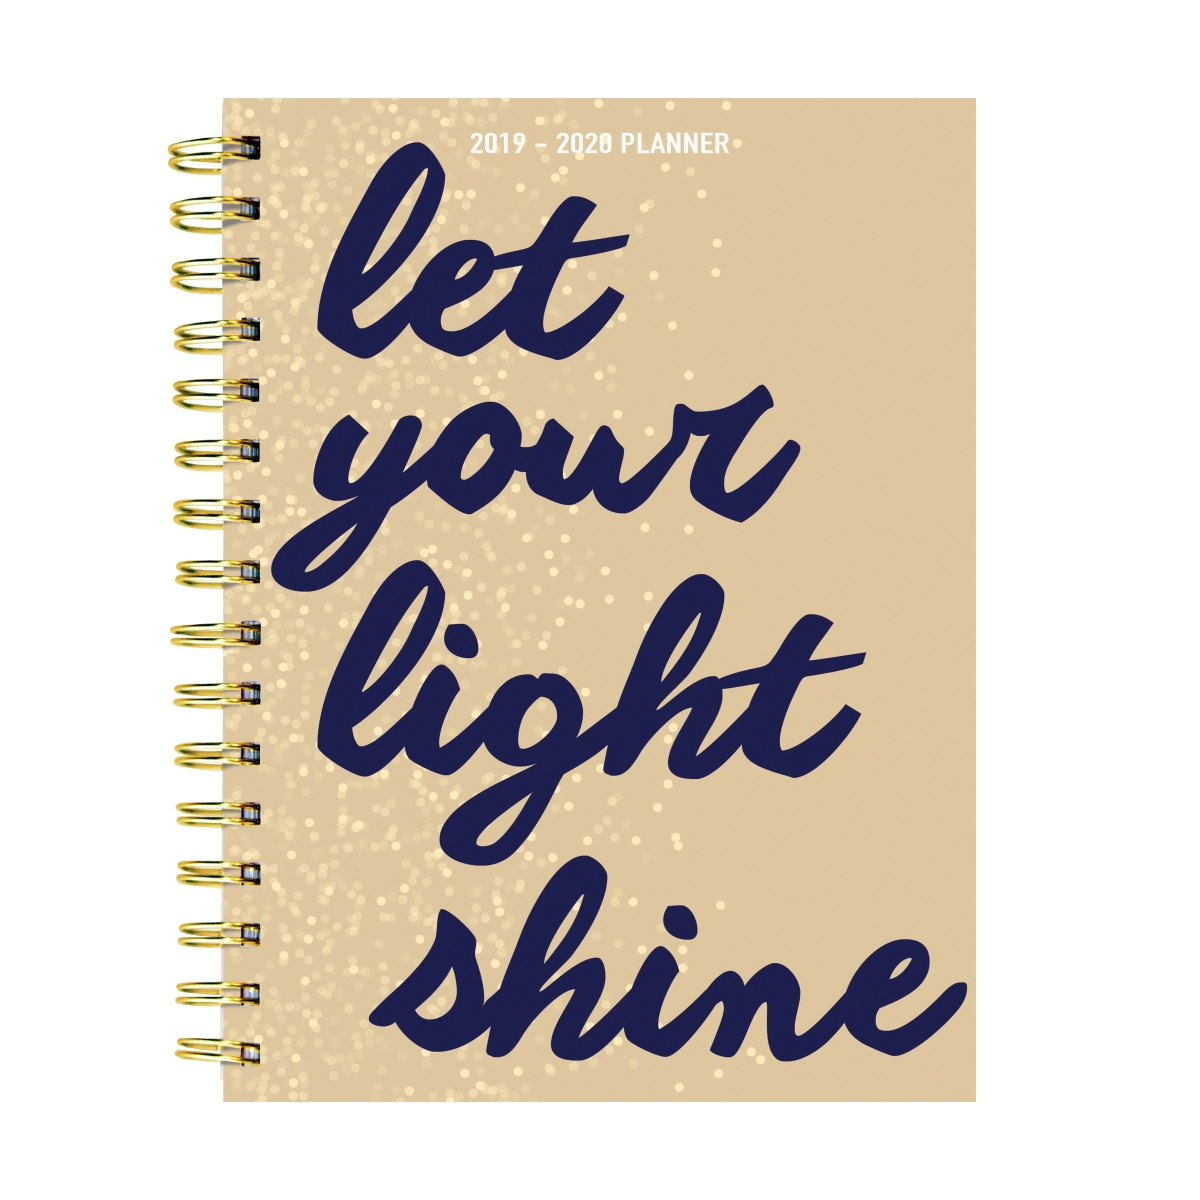 20-9083a July 2019 - June 2020 Light Shine Medium Daily Weekly Monthly Planner